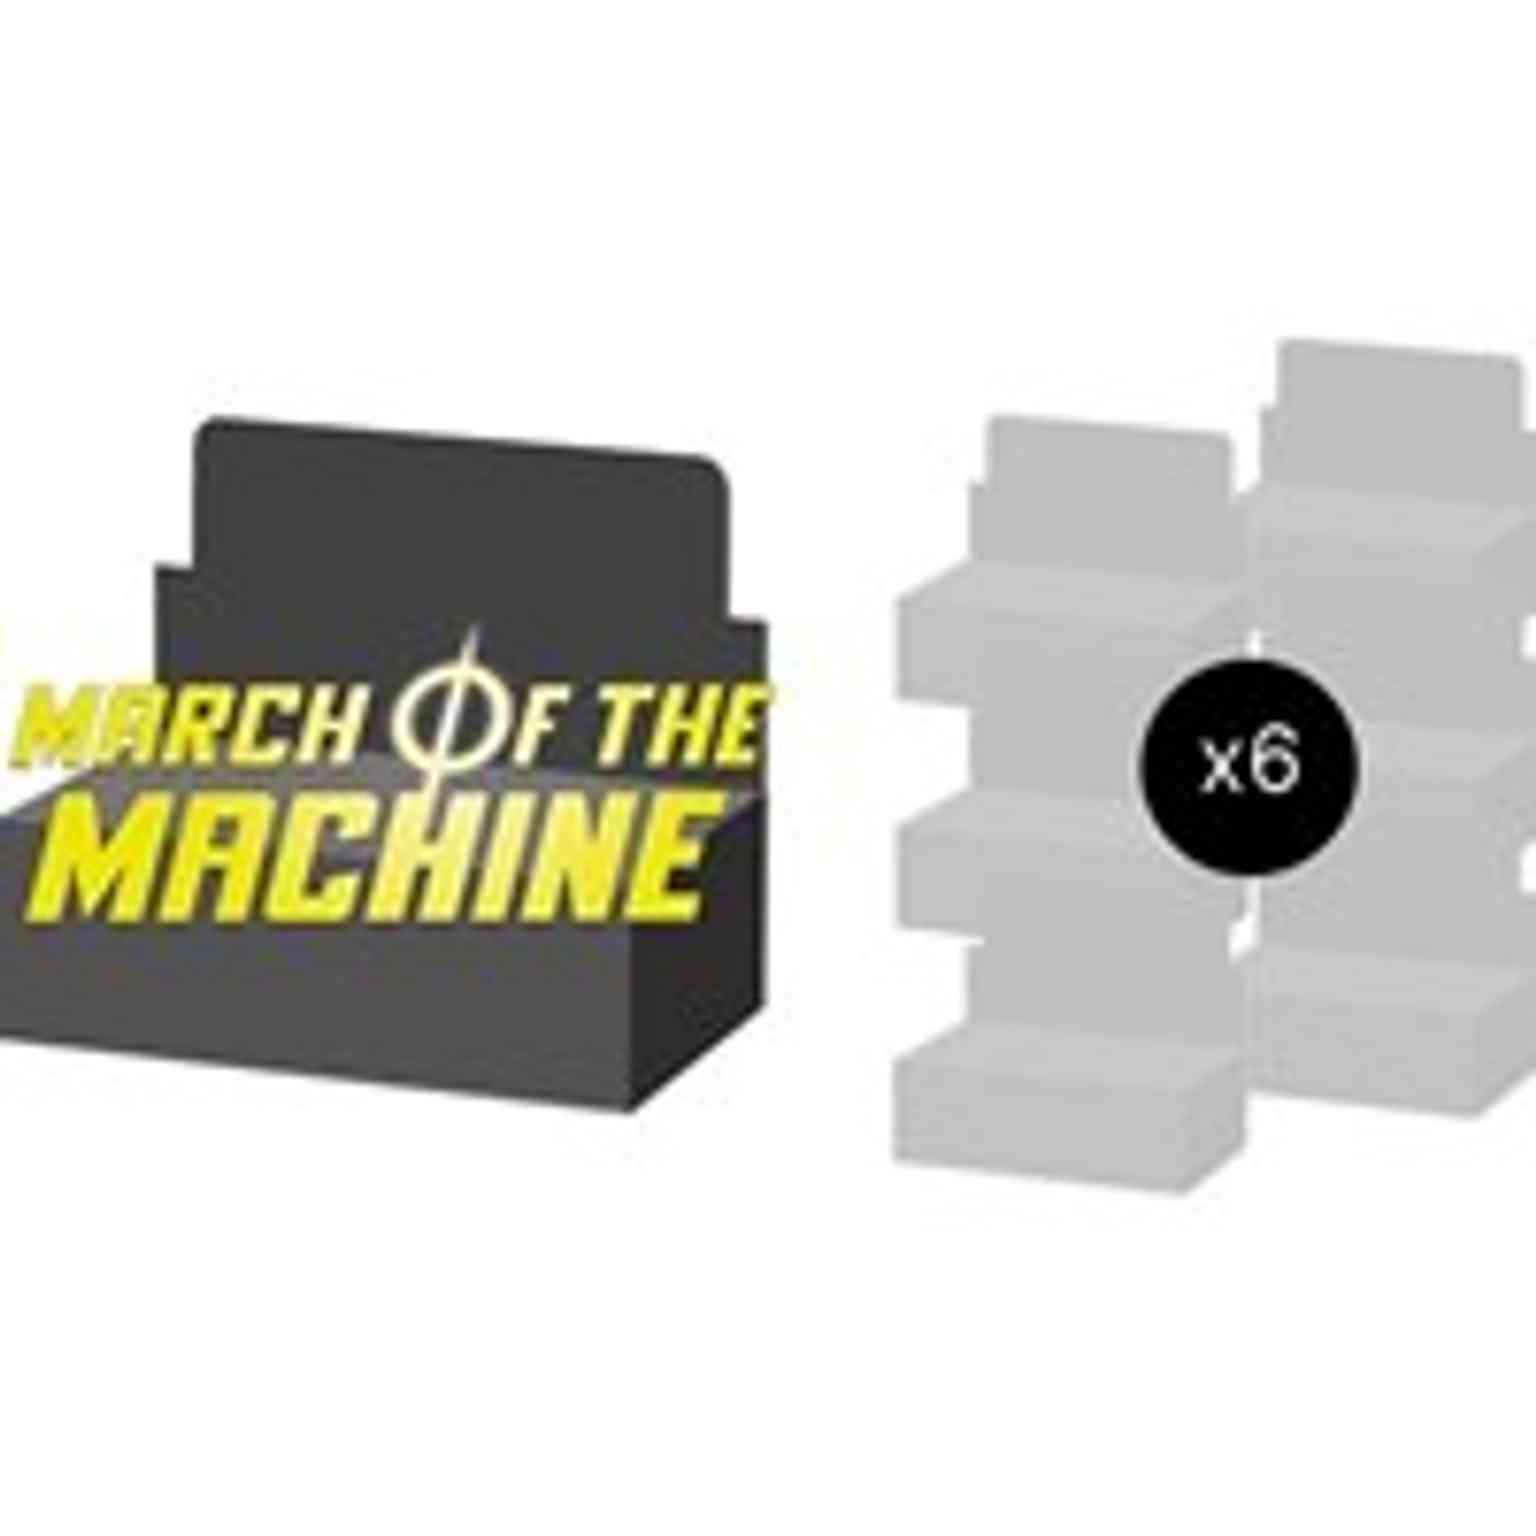 March of the Machine - Set Booster Display Case magic card front